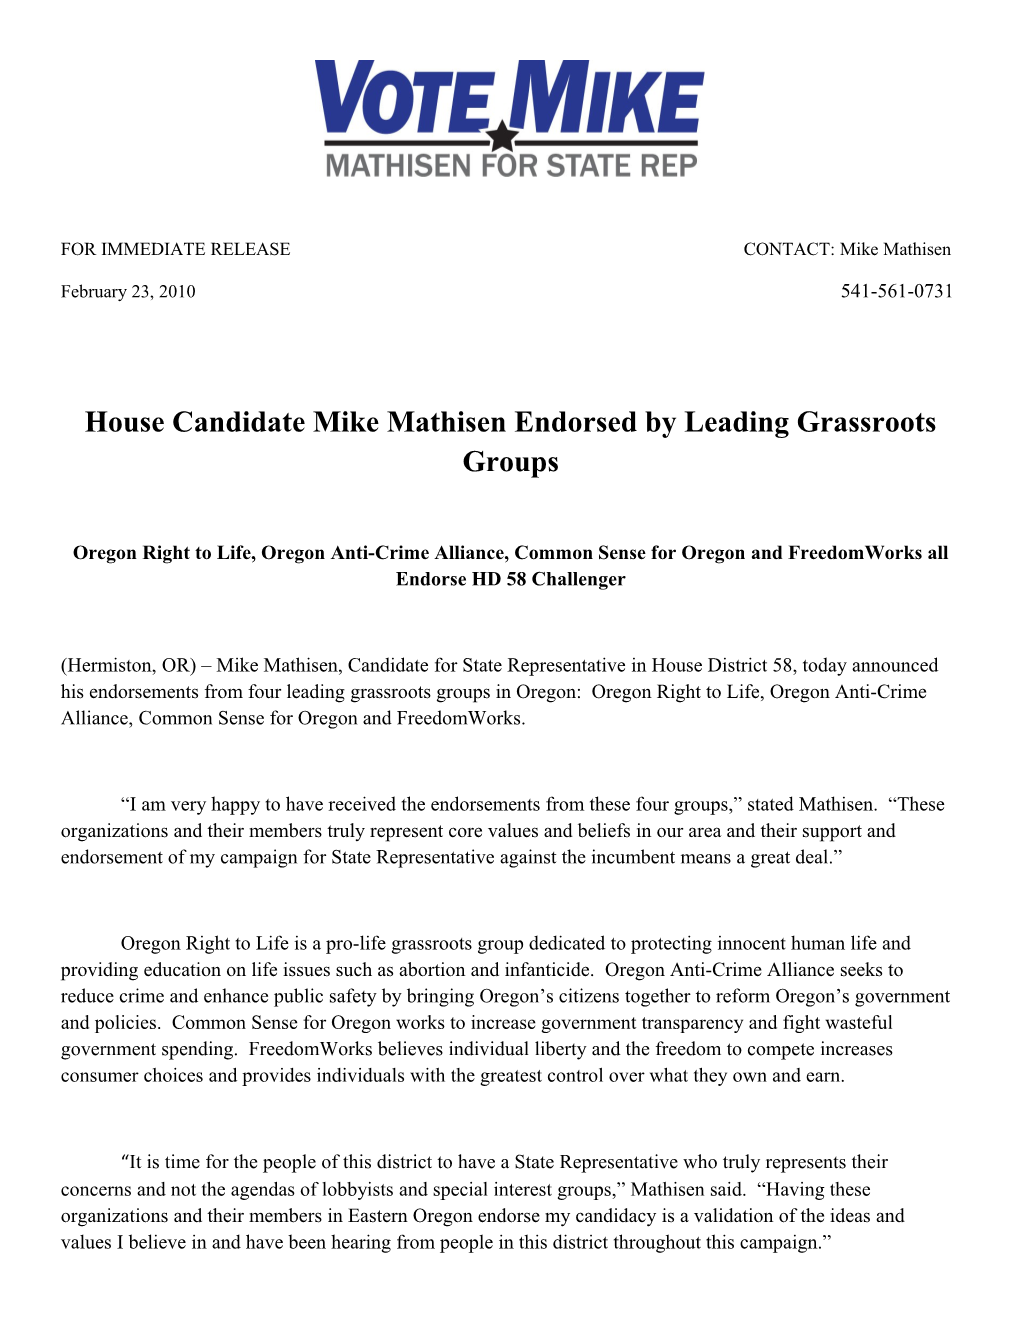 House Candidate Mike Mathisen Endorsed by Leading Grassroots Groups